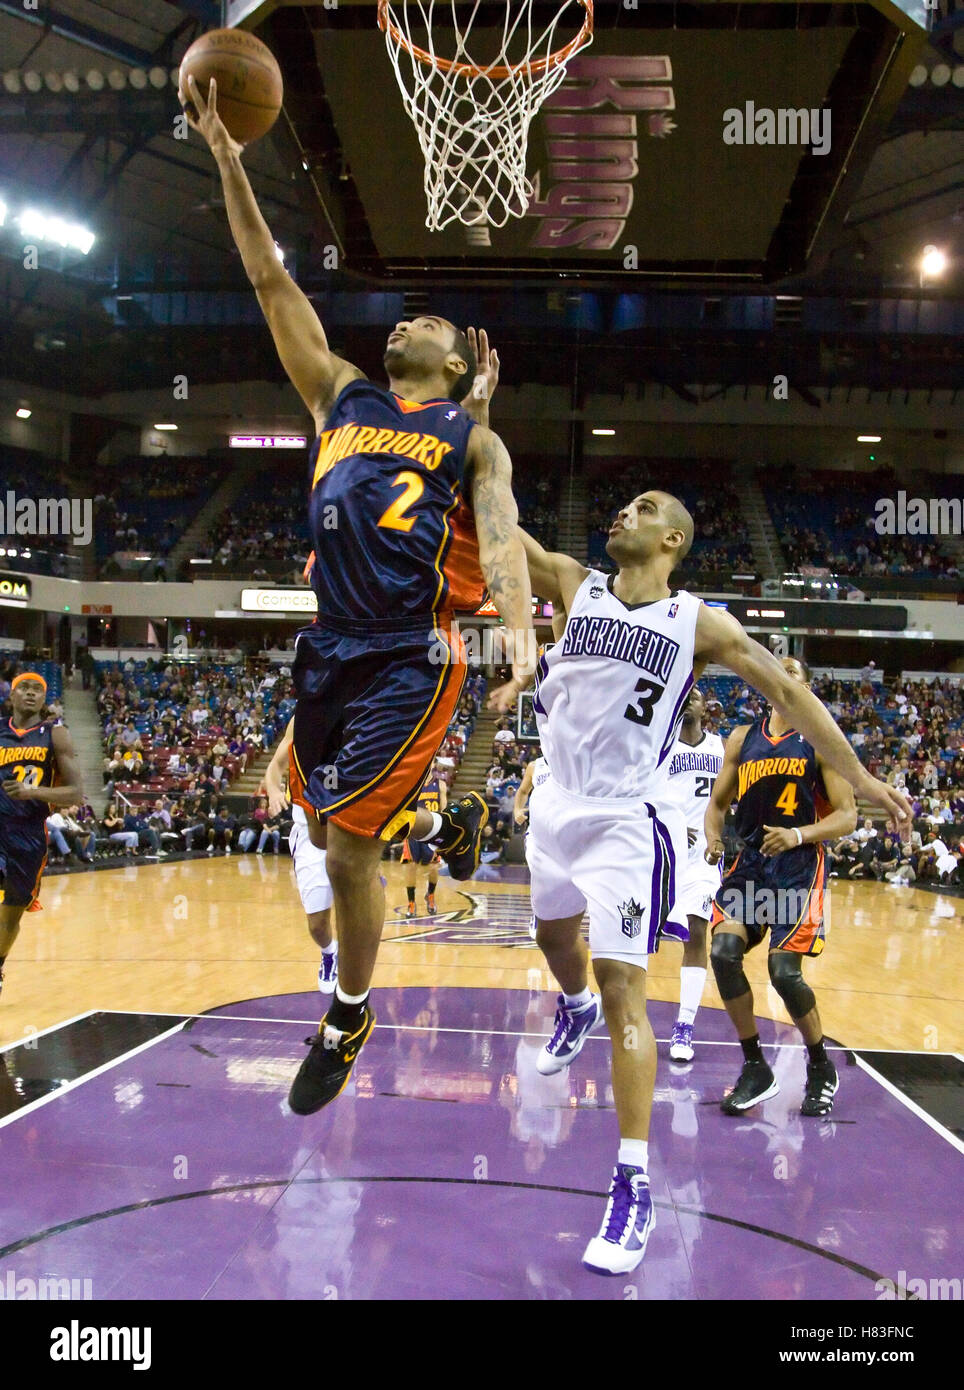 November 8, 2009; Sacramento, CA, USA;  Golden State Warriors guard Acie Law (2) shoots past Sacramento Kings forward Ime Udoka (3) during the fourth quarter at the ARCO Arena. The Kings defeated the Warriors 120-107. Stock Photo